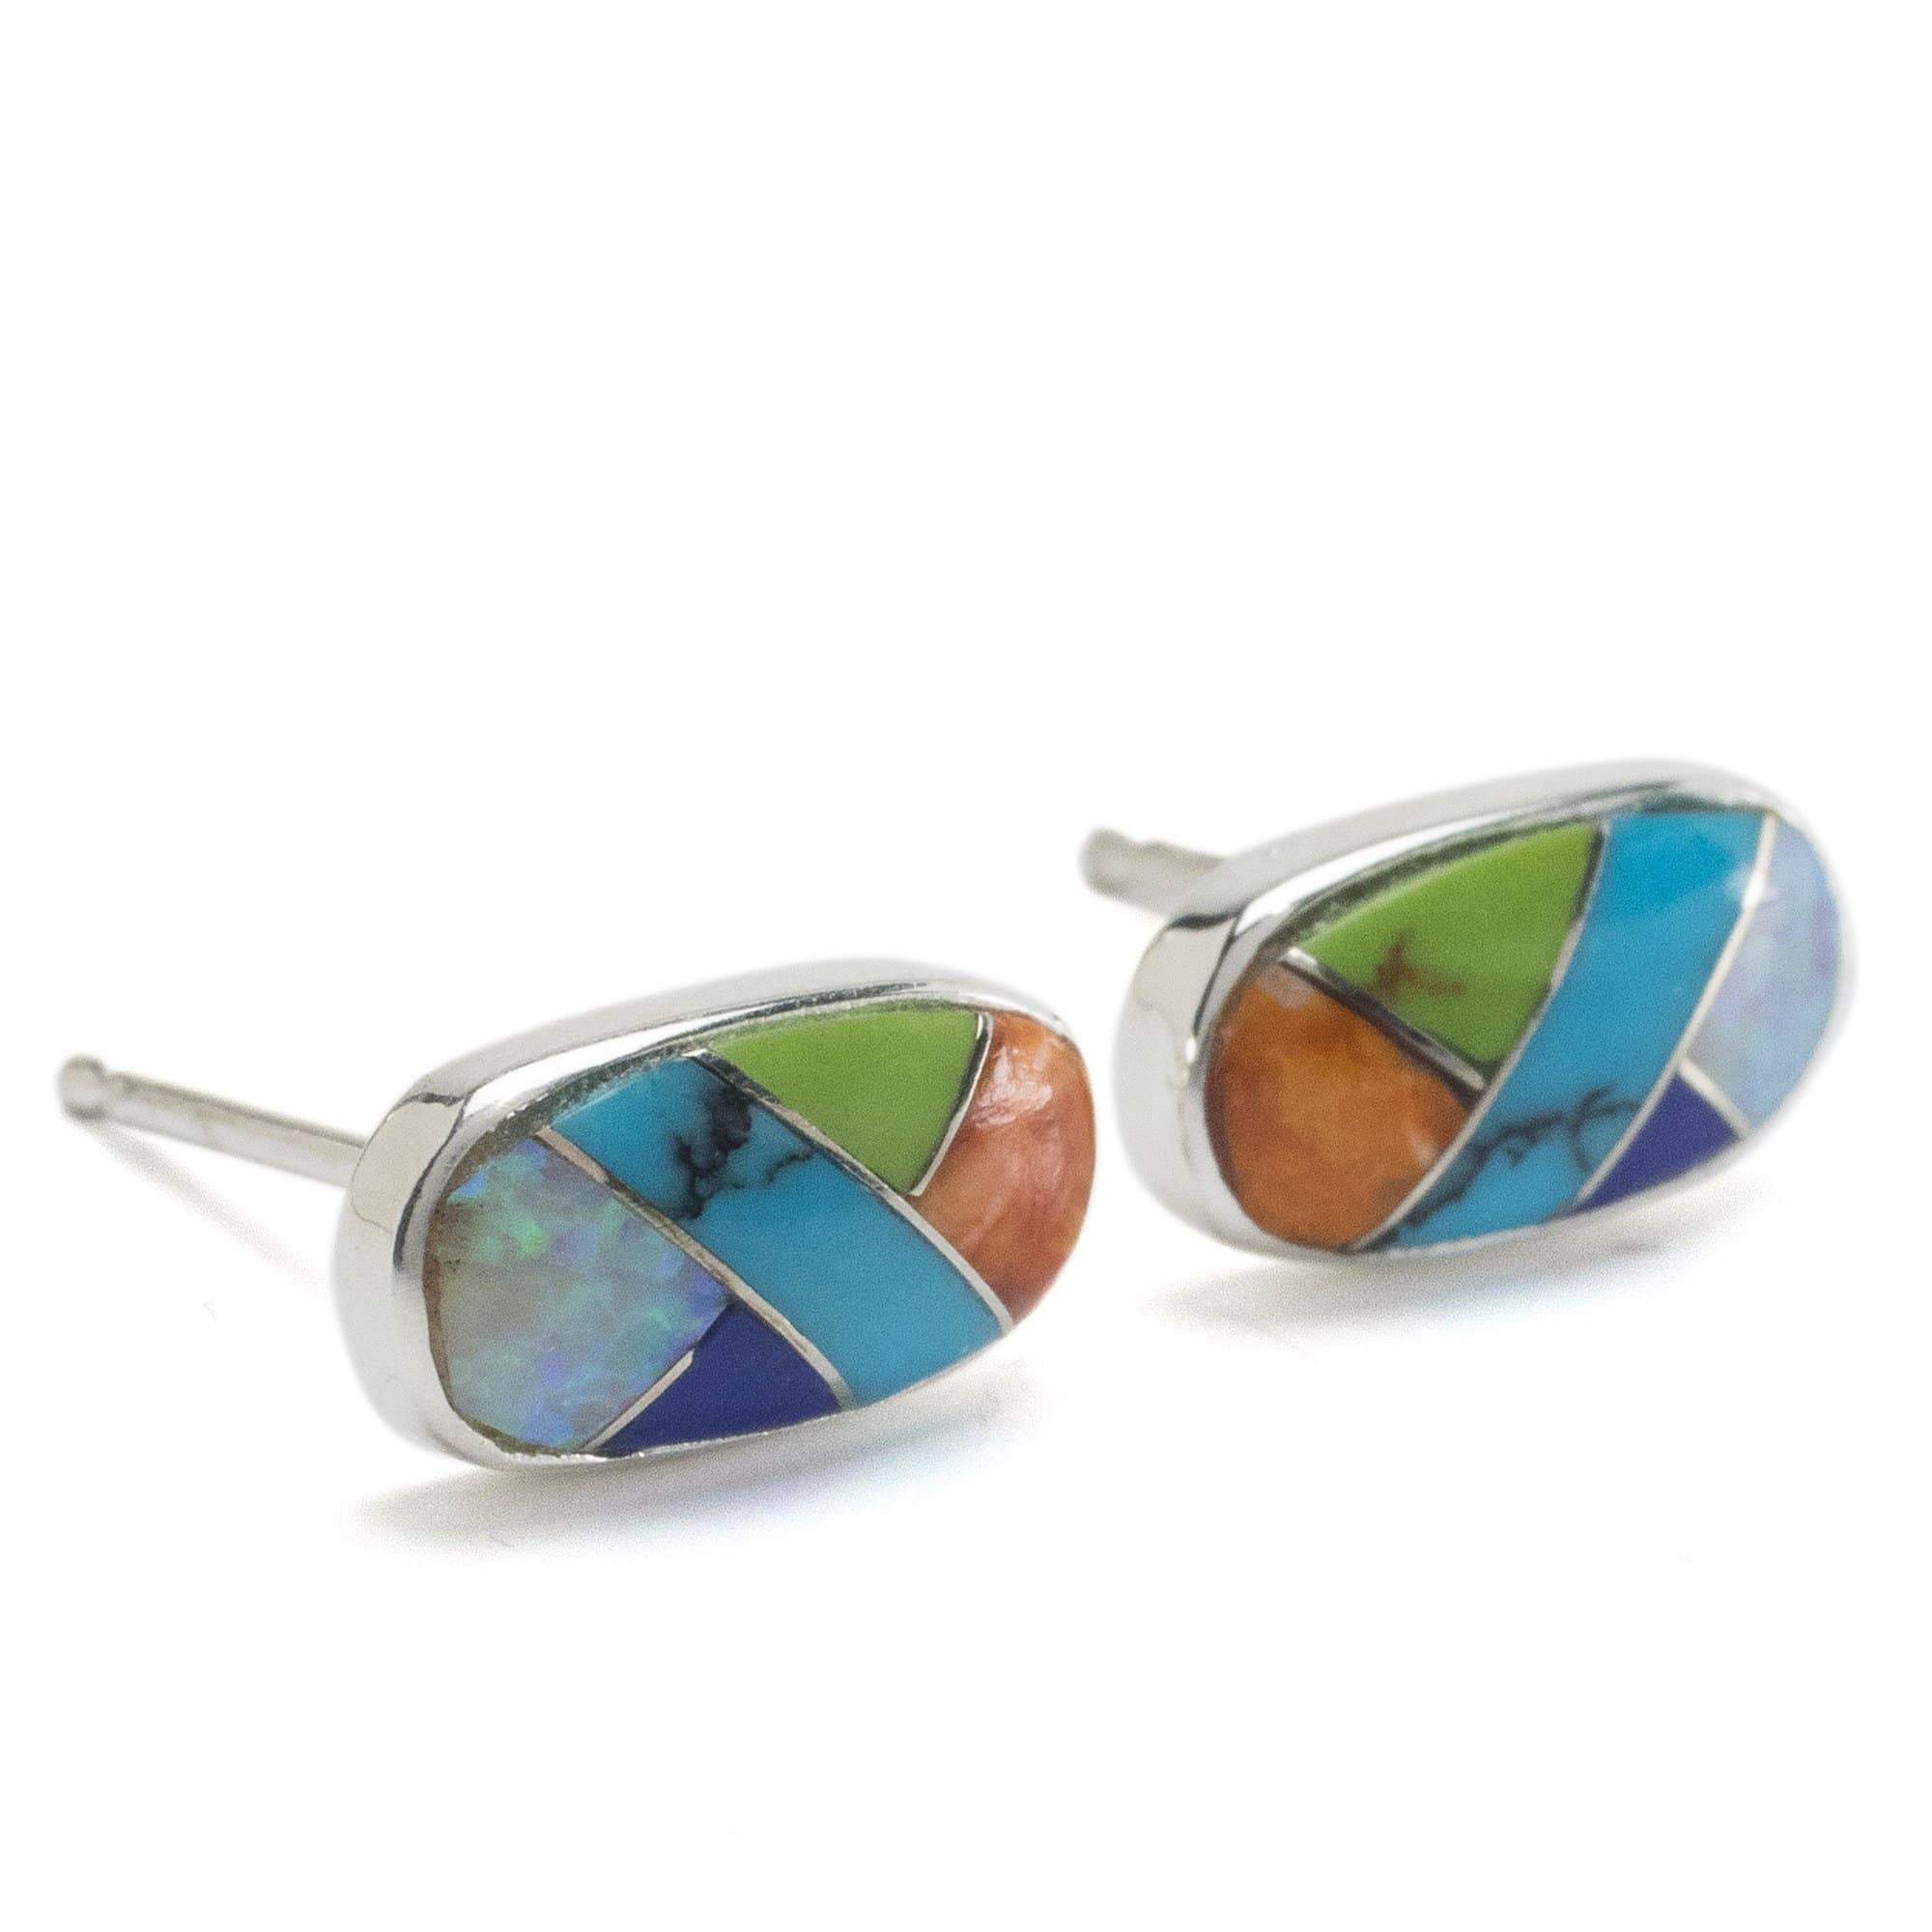 Kalifano Southwest Silver Jewelry Multi Gemstone Oval 925 Sterling Silver Earring with Stud Backing USA Handmade with Opal Accent NME.2238.MT